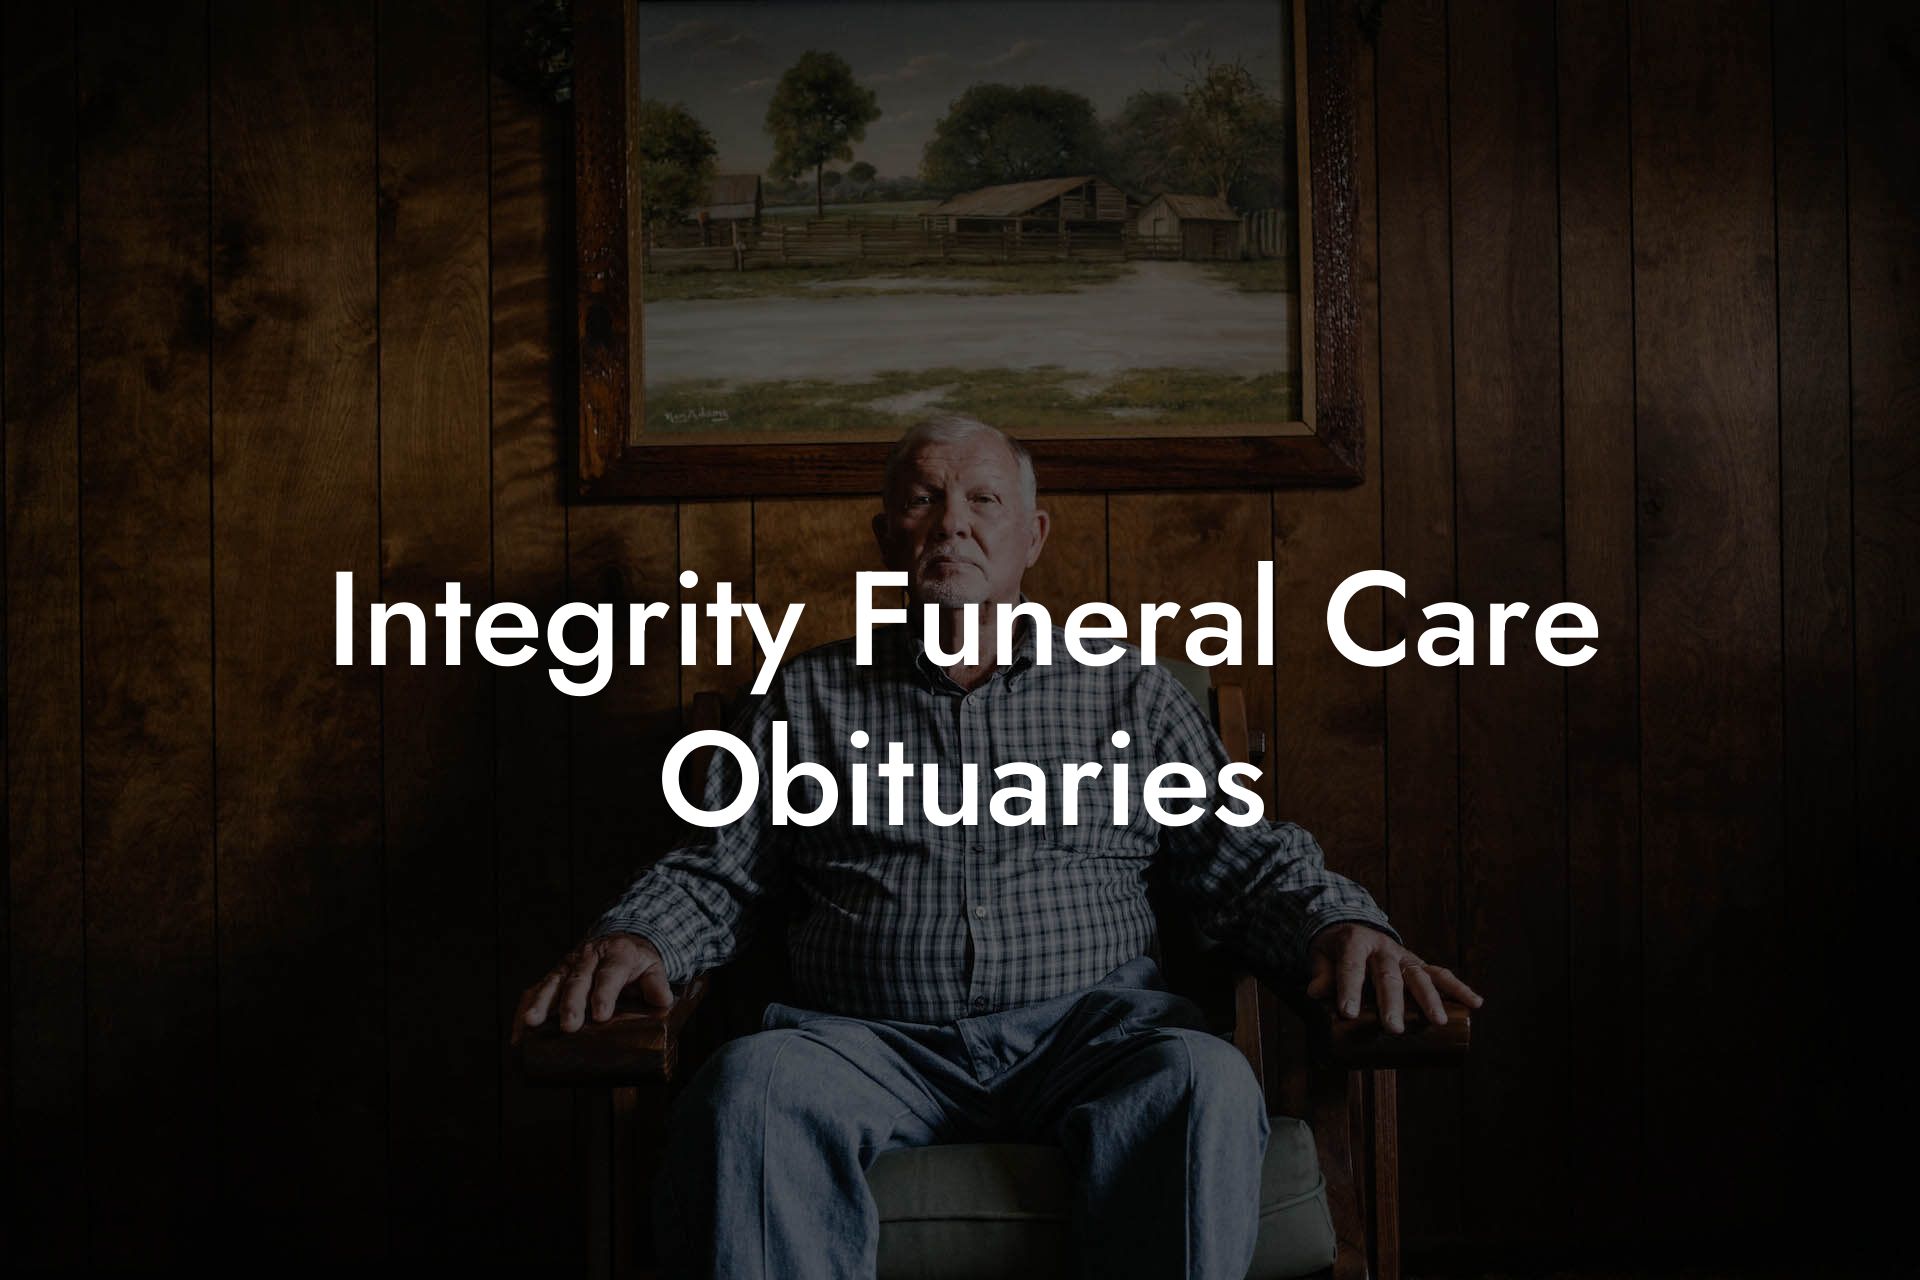 Integrity Funeral Care Obituaries